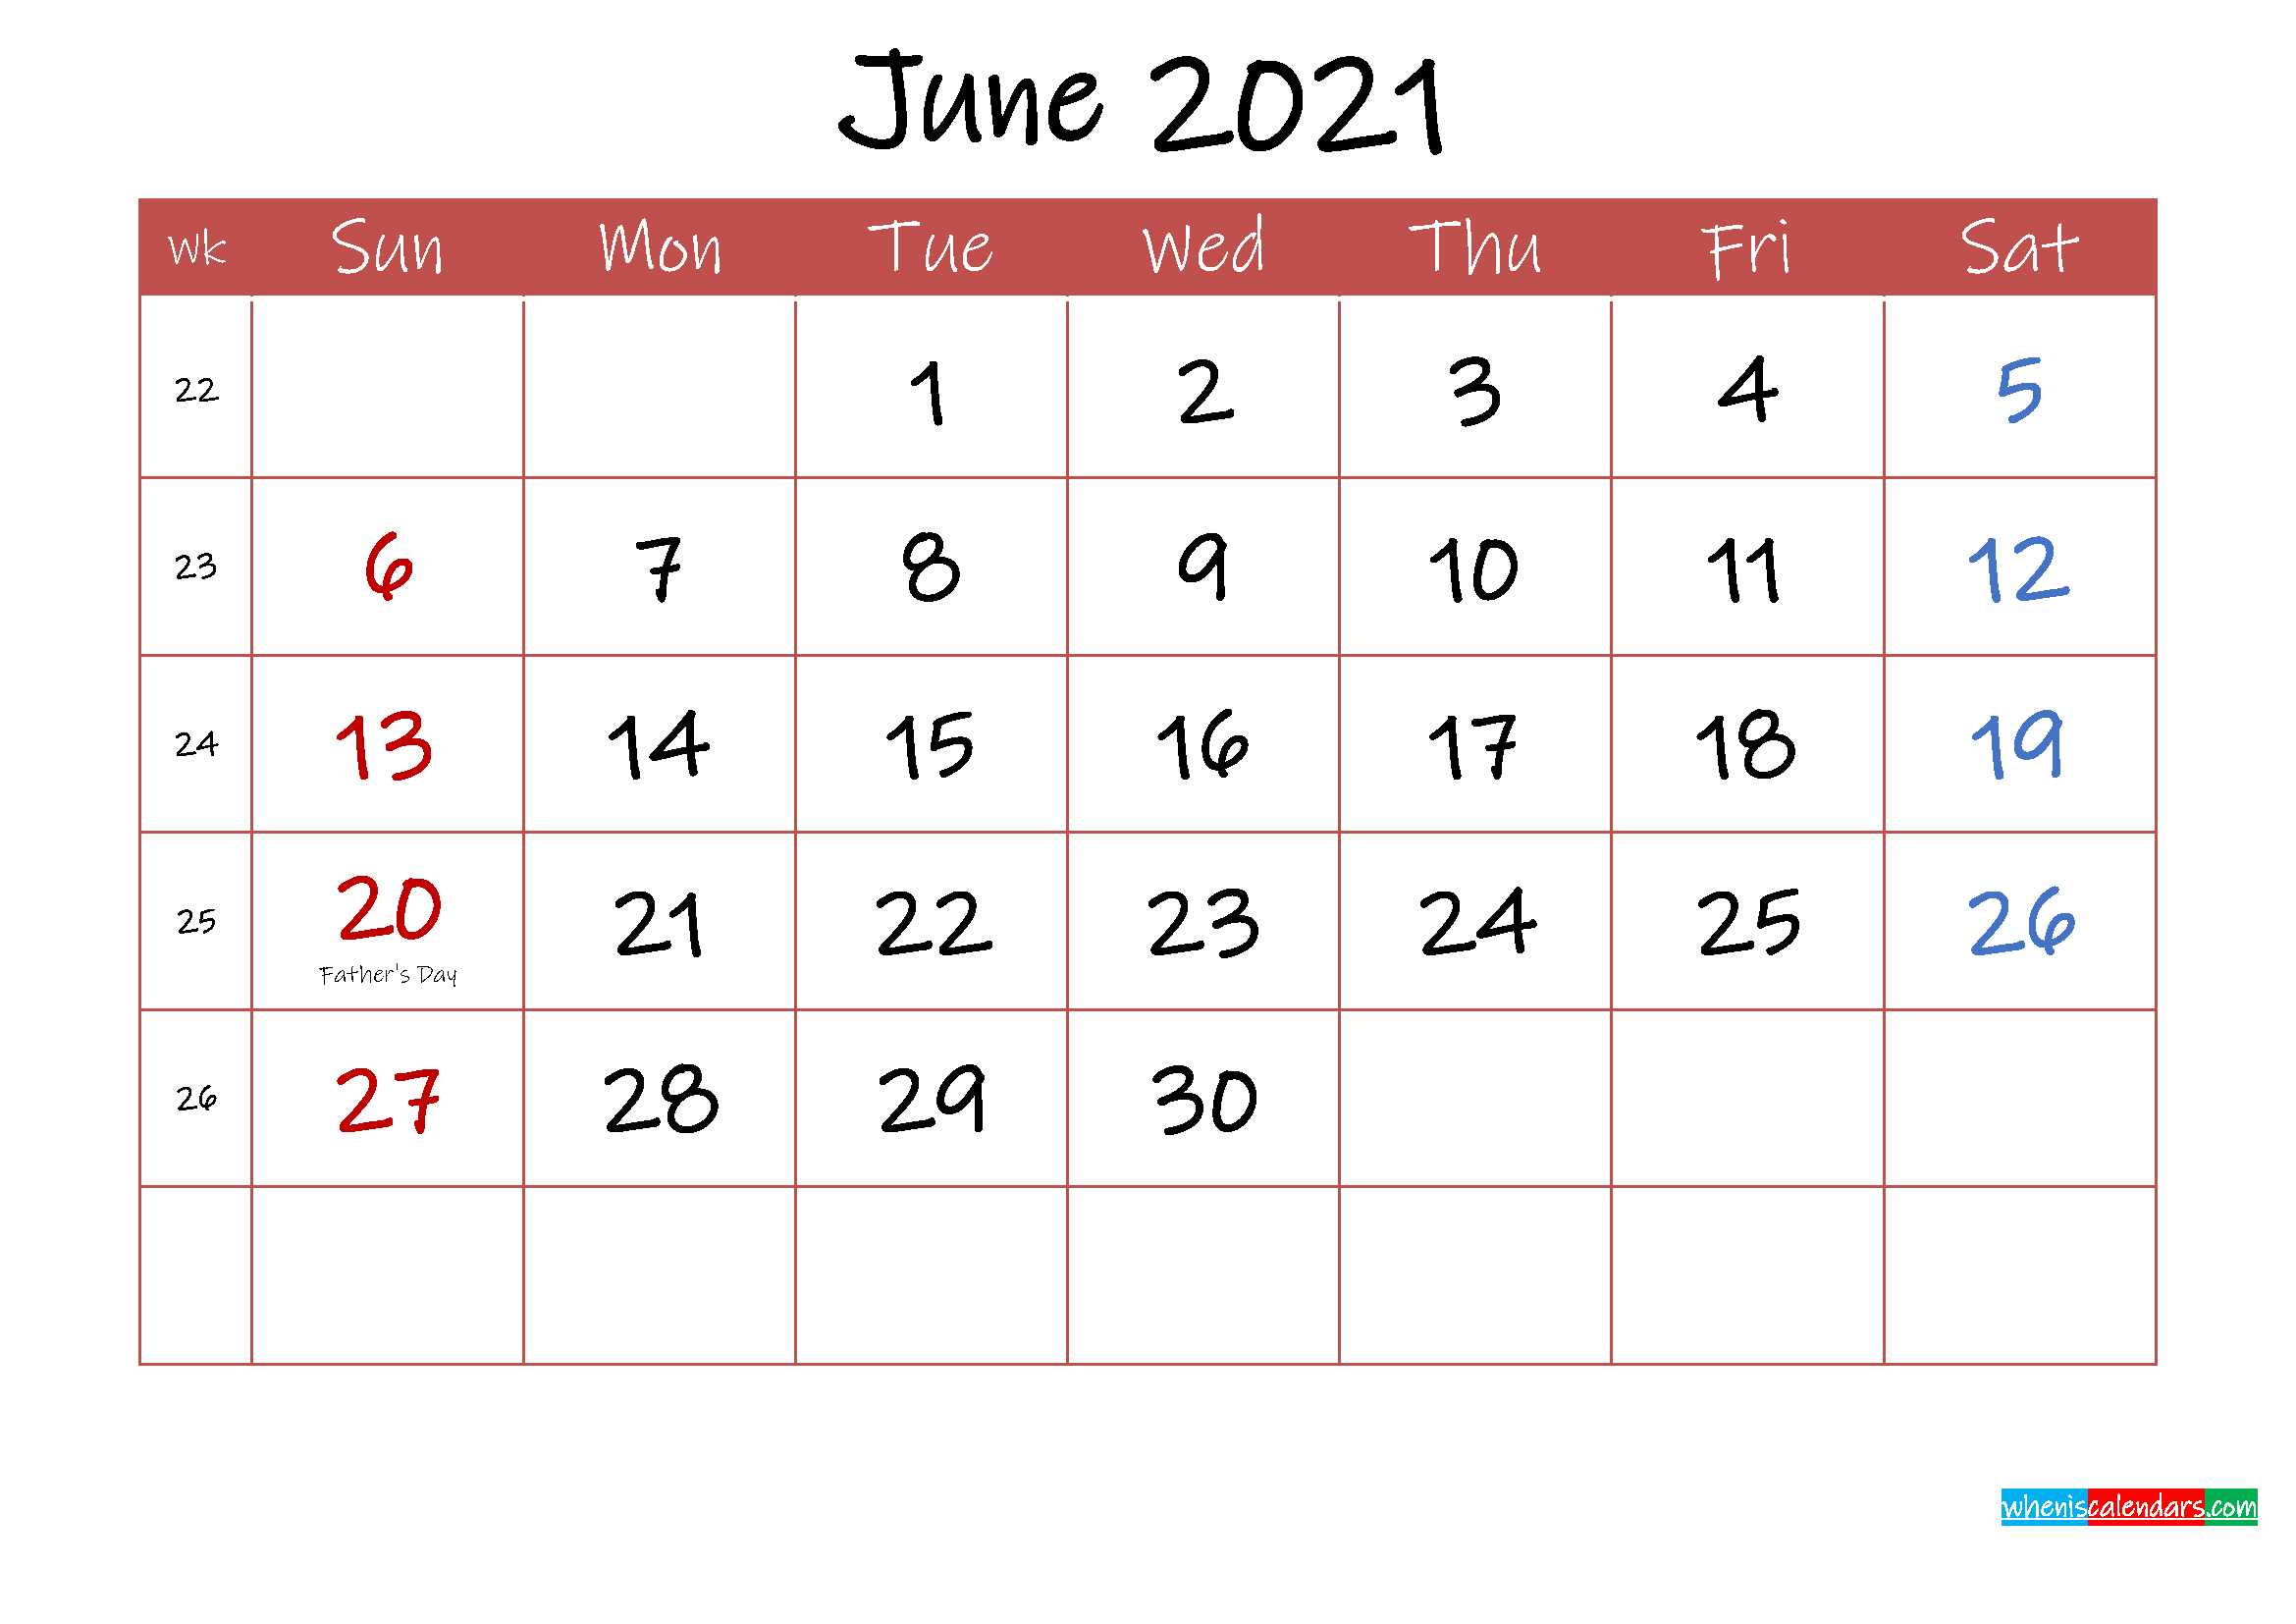 Printable June 2021 Calendar with Holidays - Template ink21m30